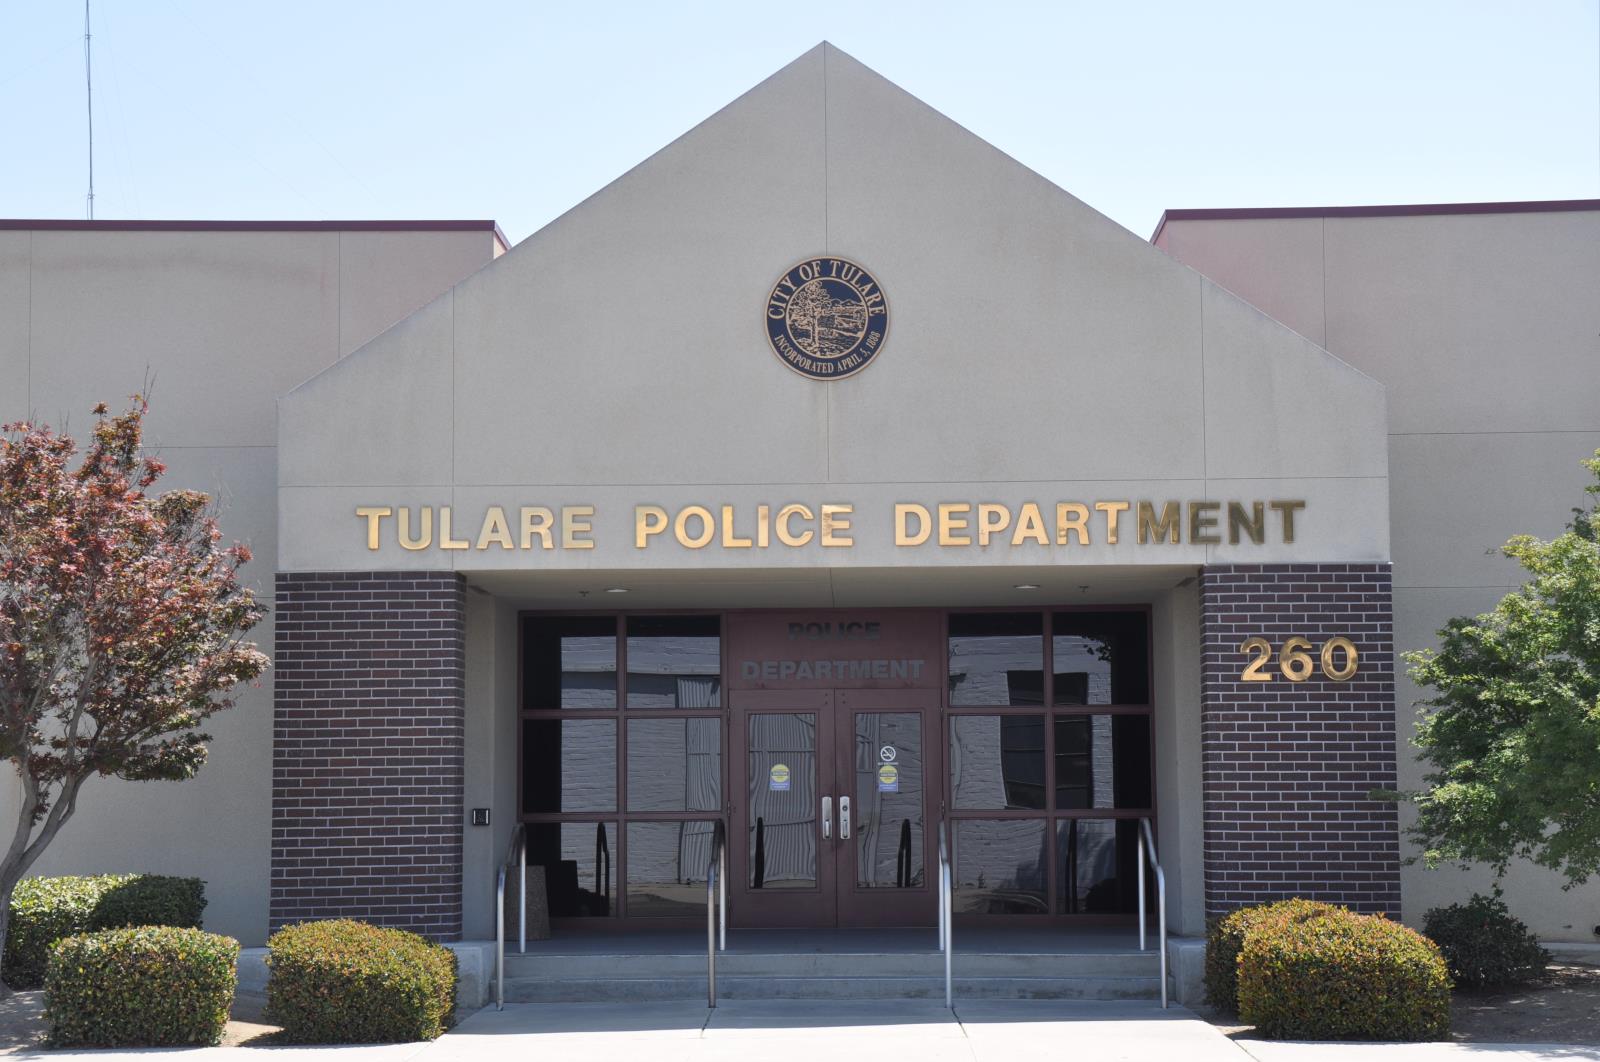 Image of the Tulare Police Department Building